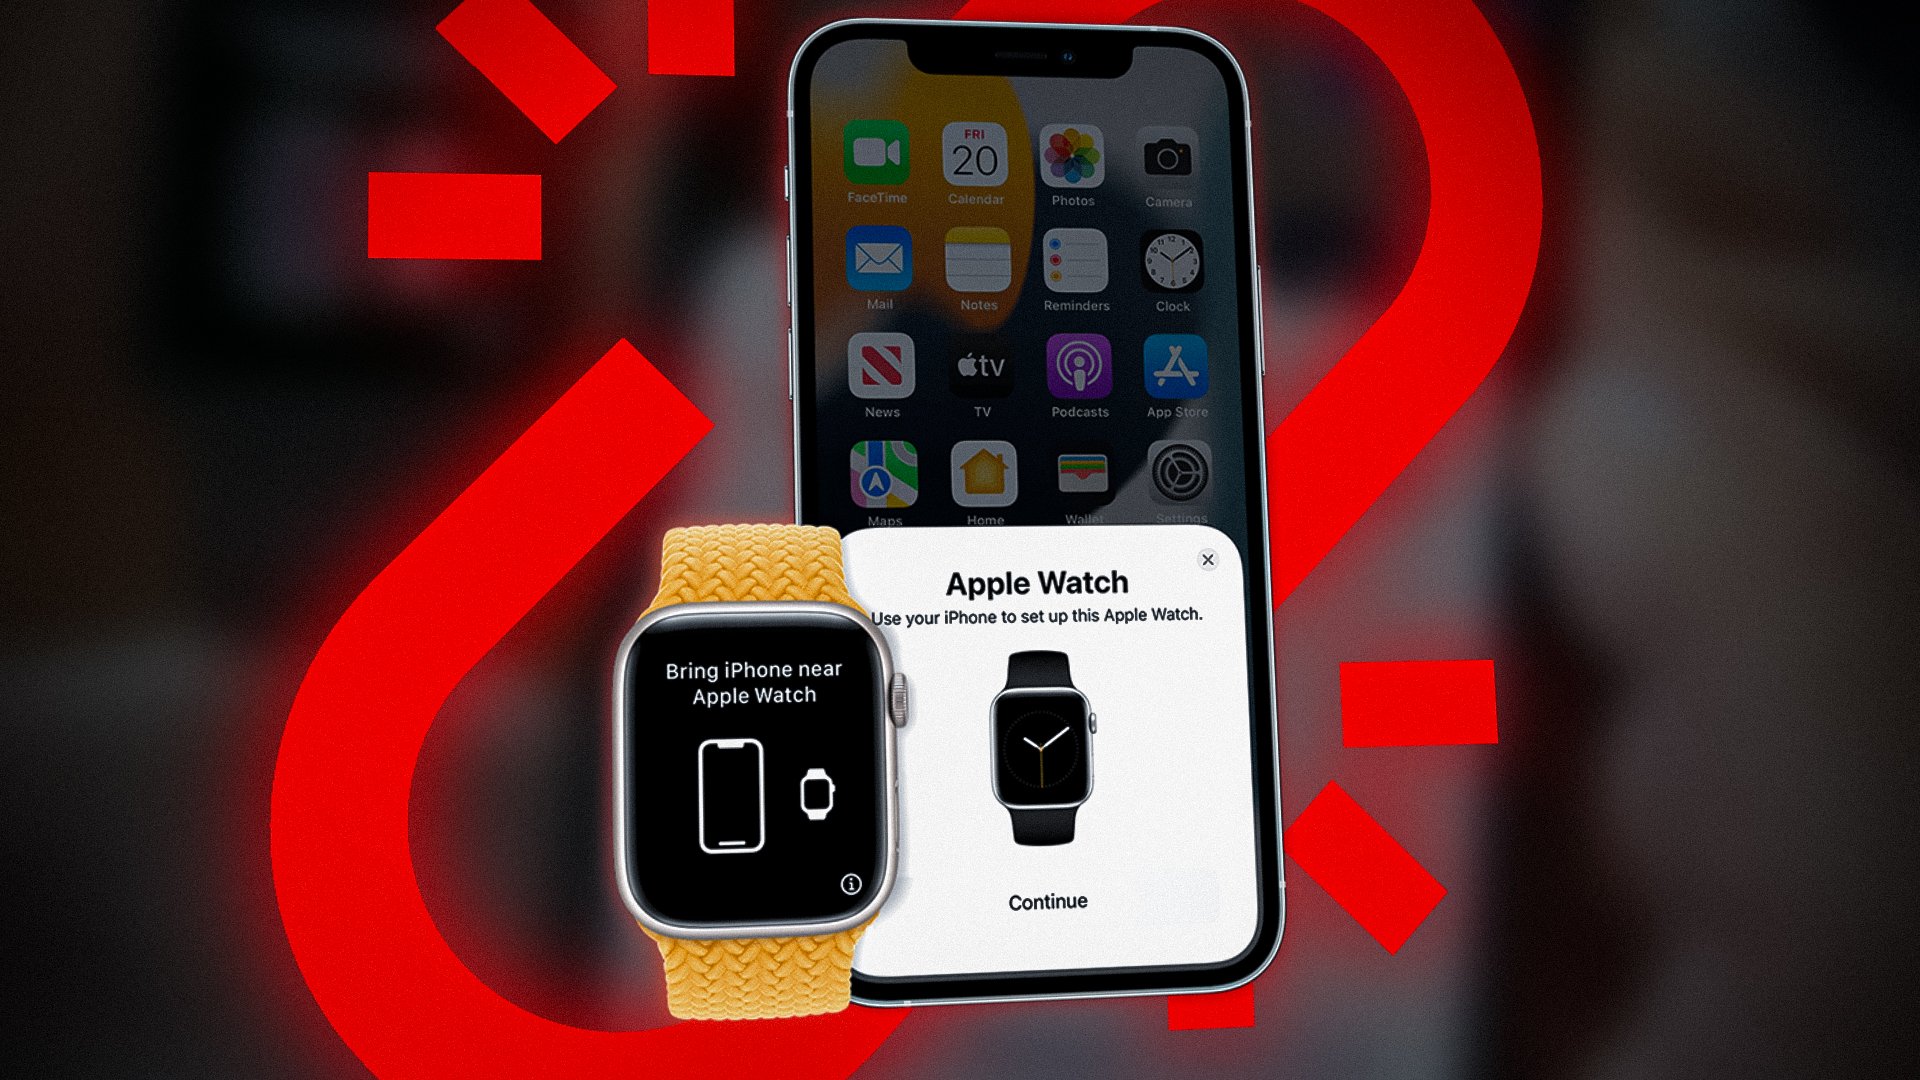 5 Methods to Unpair Apple Watch [Without or Without iPhone]